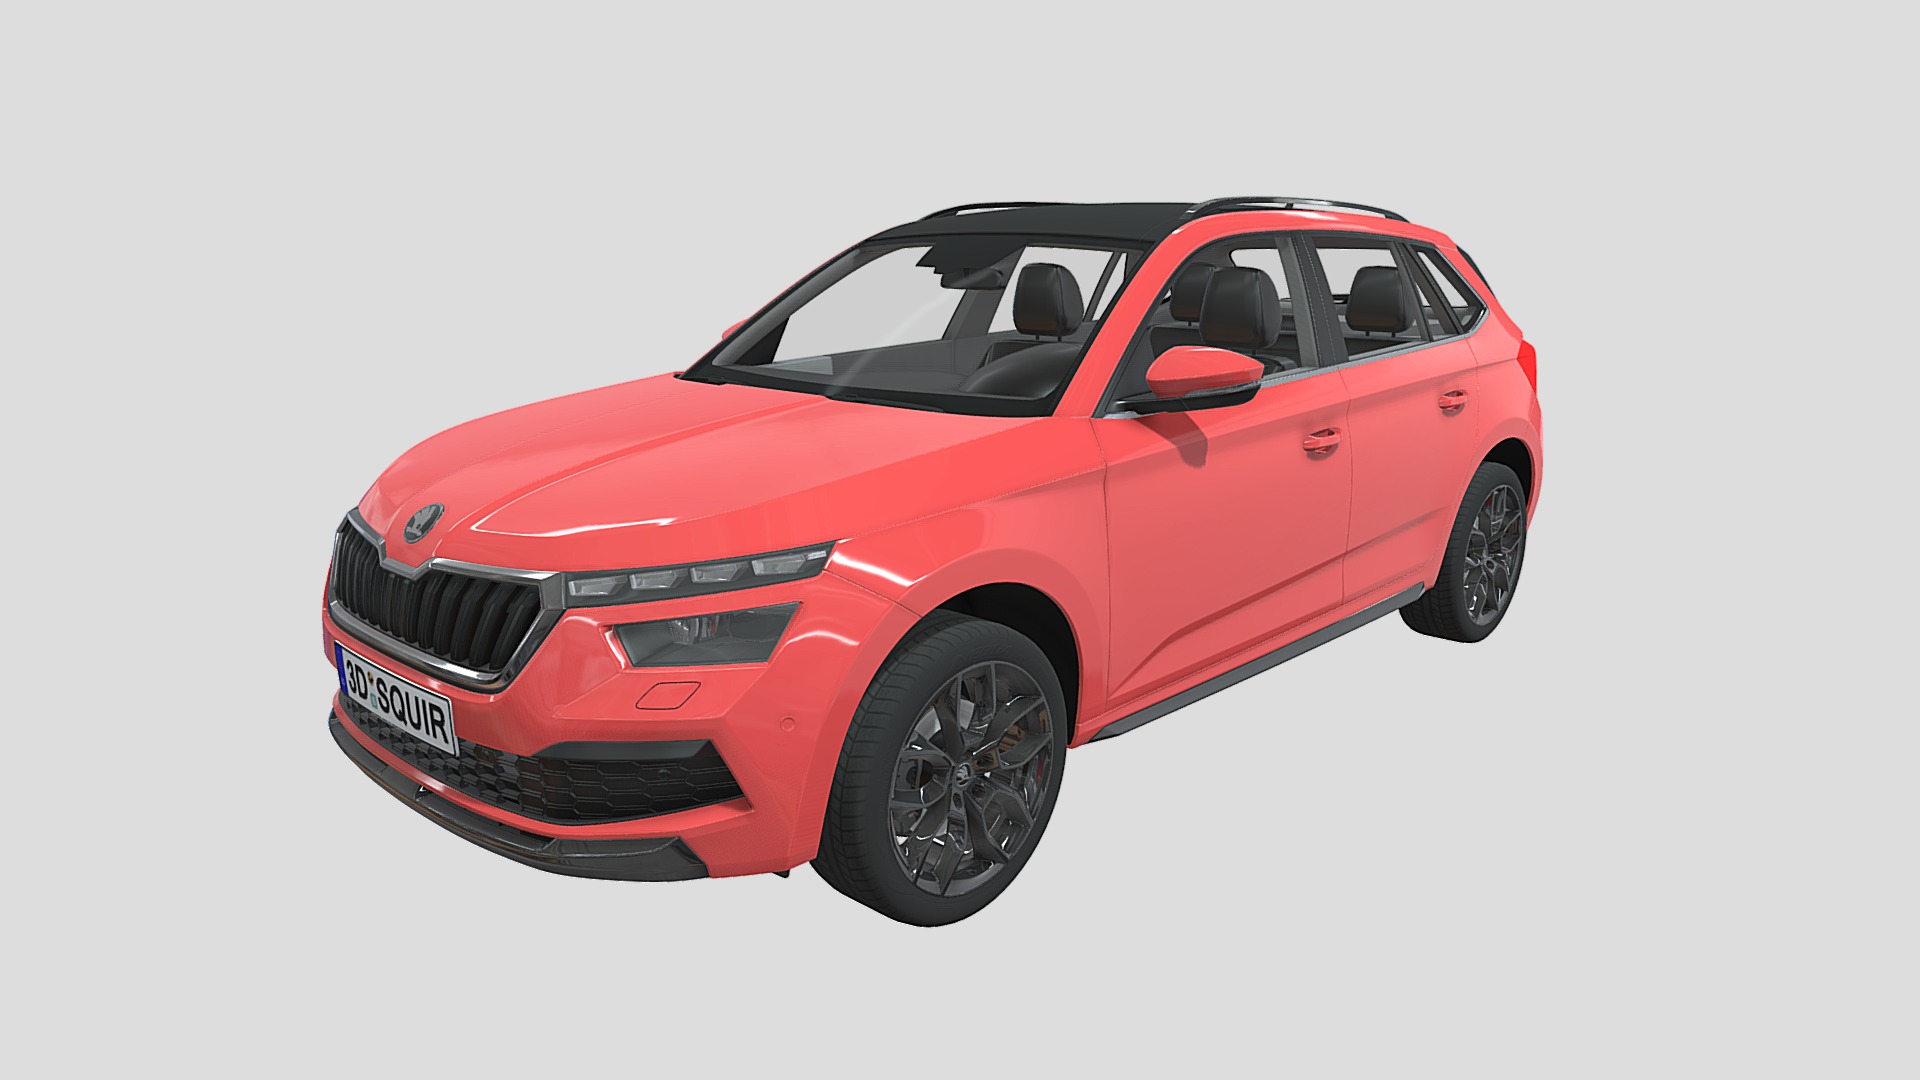 3D model Skoda Kamiq 2020 - This is a 3D model of the Skoda Kamiq 2020. The 3D model is about a red car with a white background.